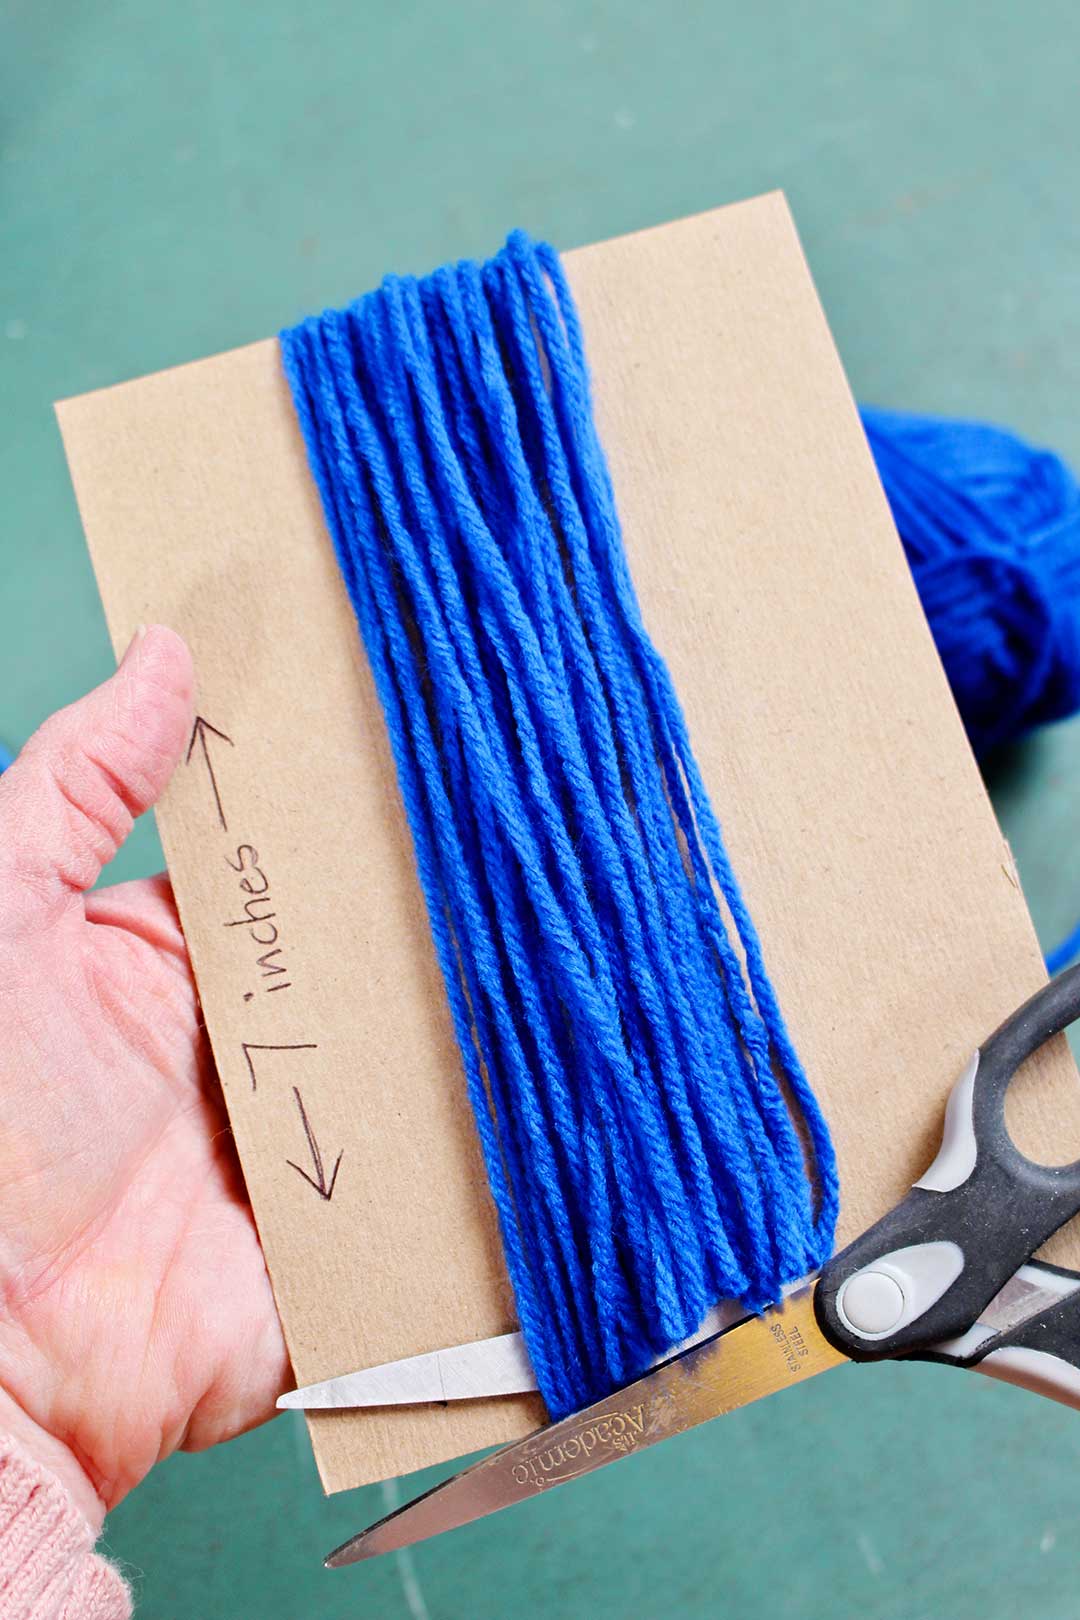 Blue yarn wrapped around a piece of cardboard, being cut by a pair of scissors.